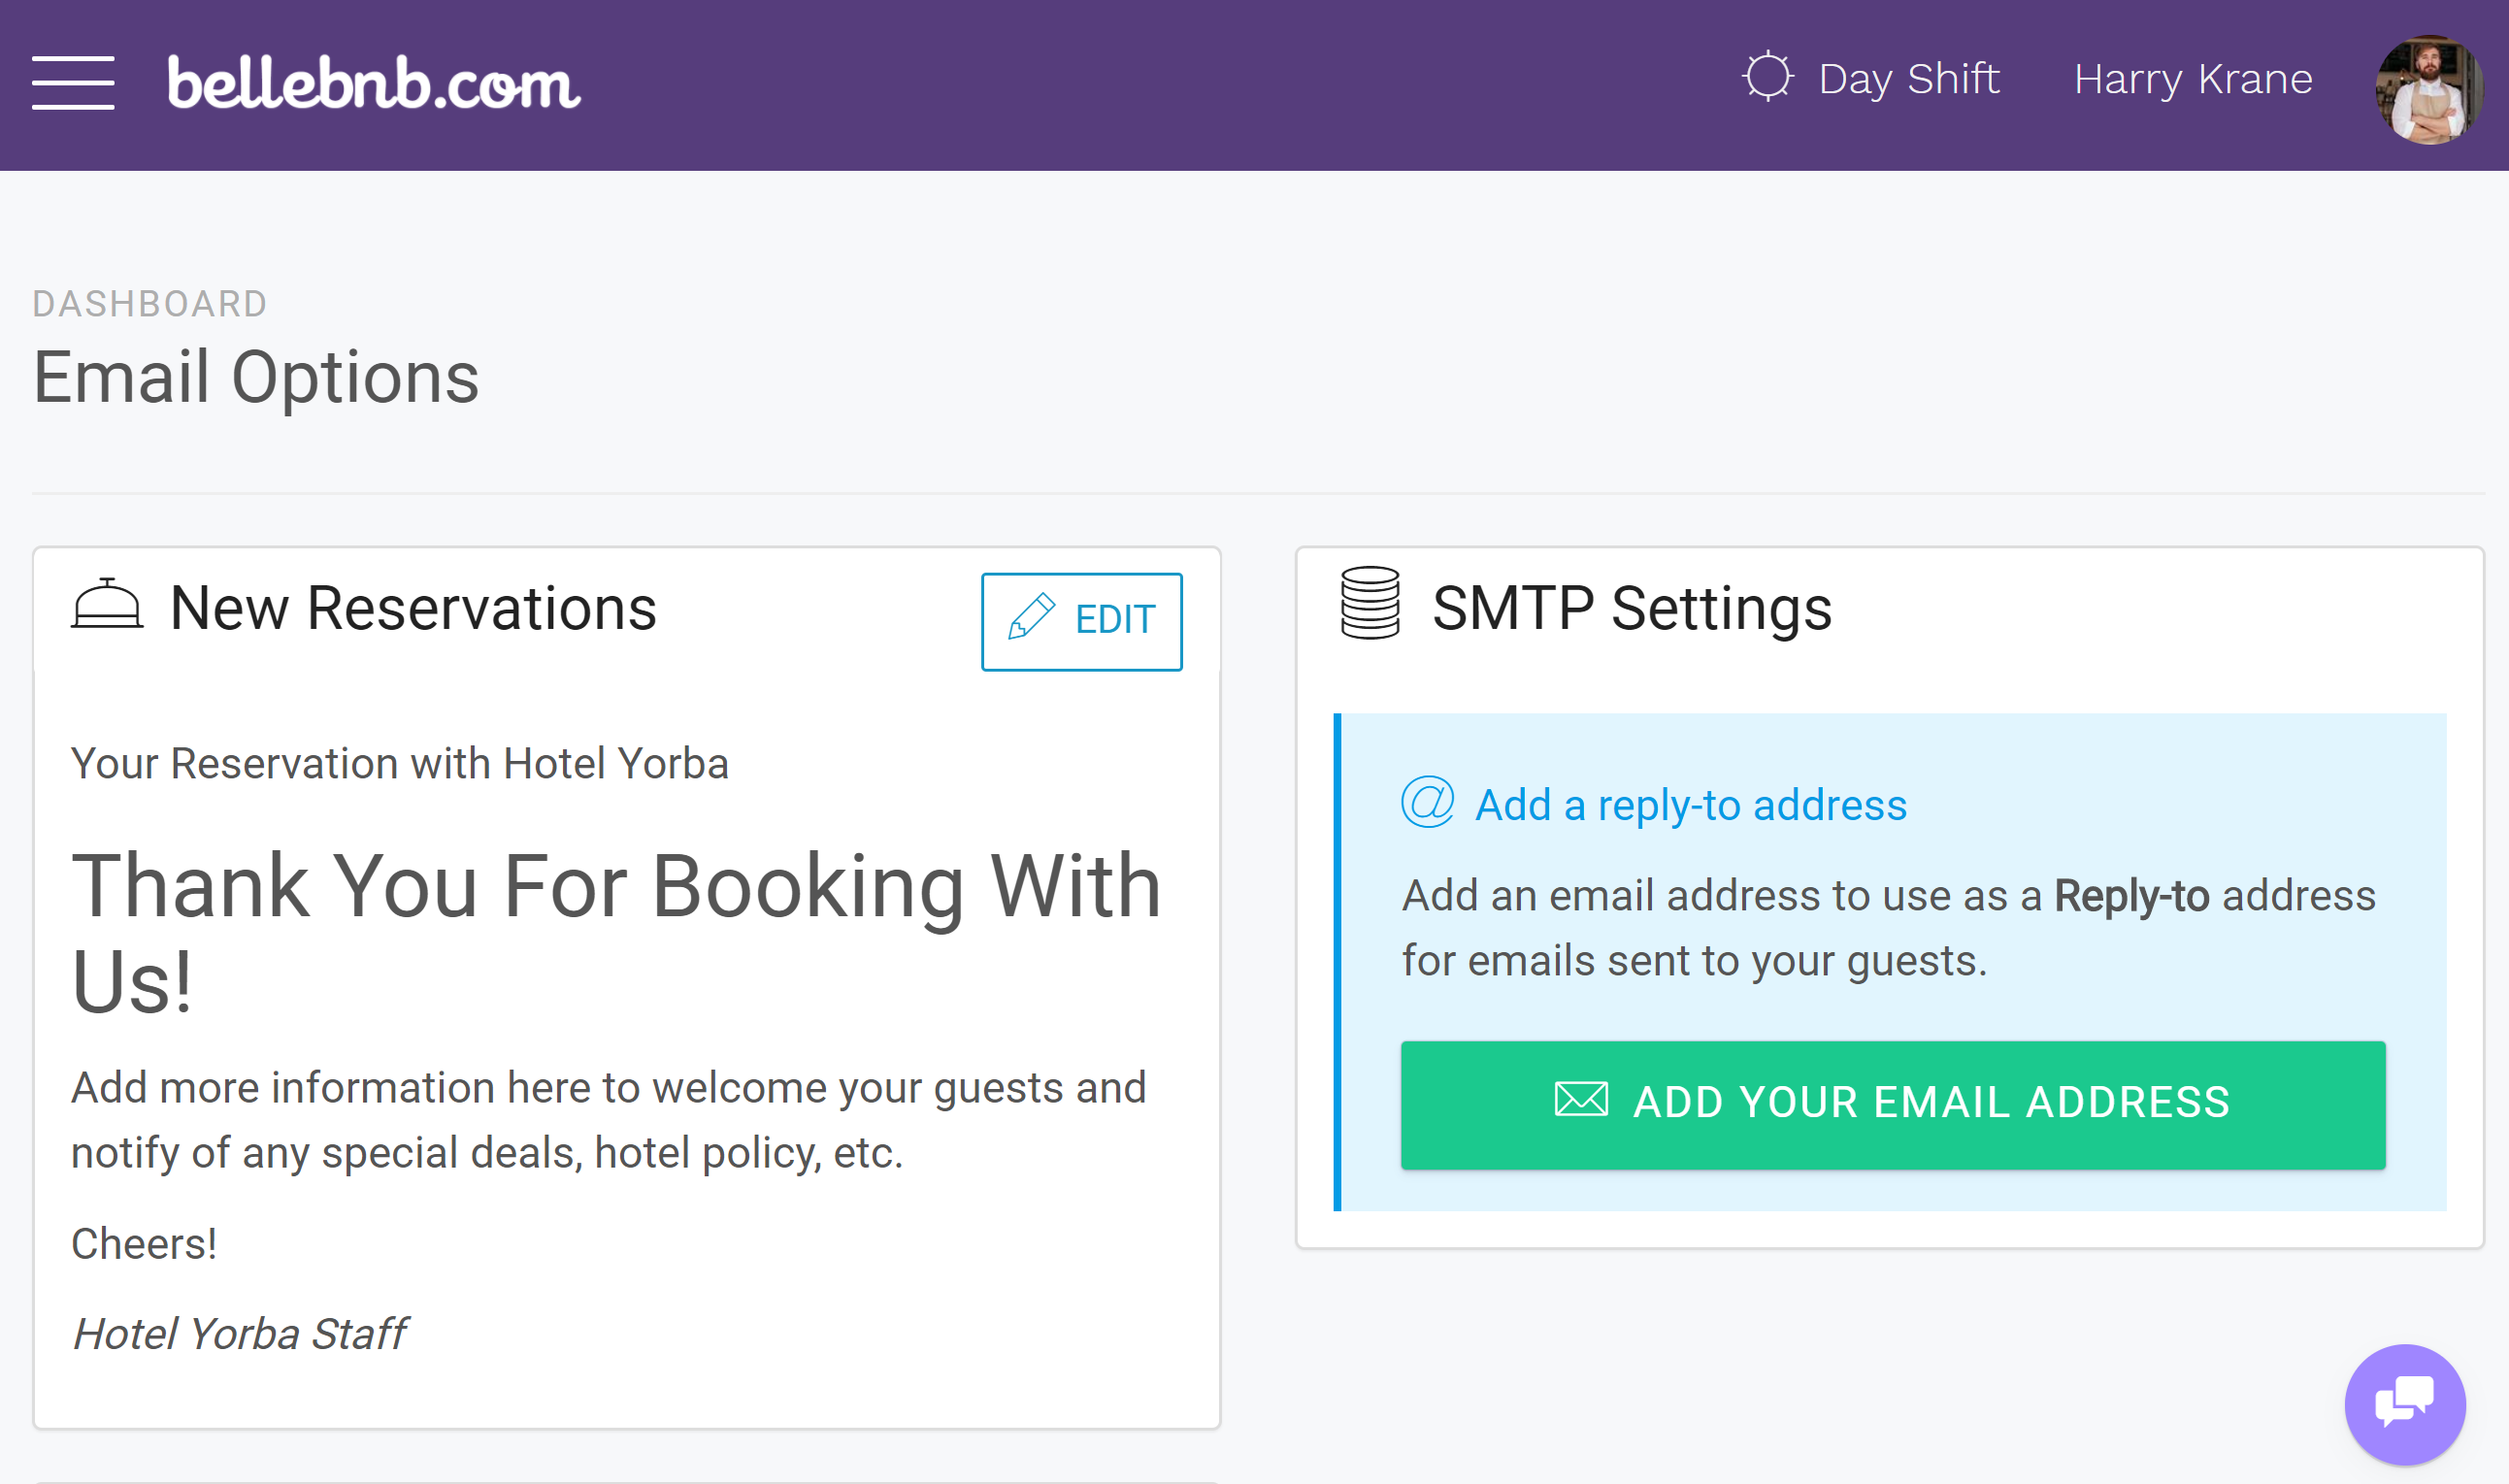 Hotel Management HTML Emails You can now create custom emails for your daily hotel activities. You can create a custom message for new reservations, check-outs, and cancellations. Edit your messages in HTML to send out automatically as part of your bookings flow.